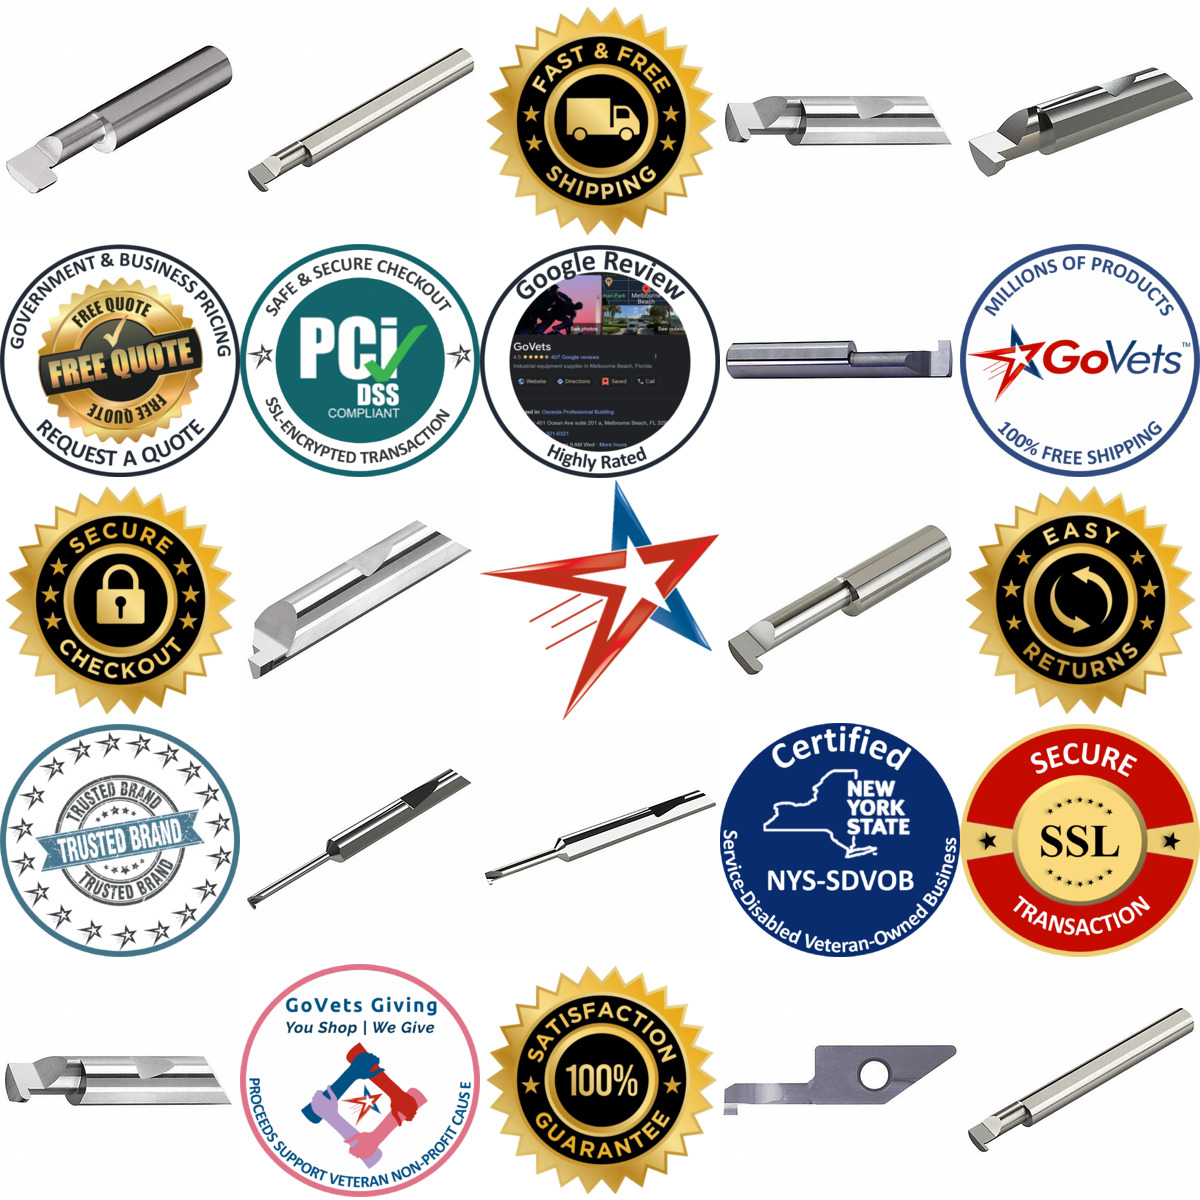 A selection of Grooving Tools products on GoVets